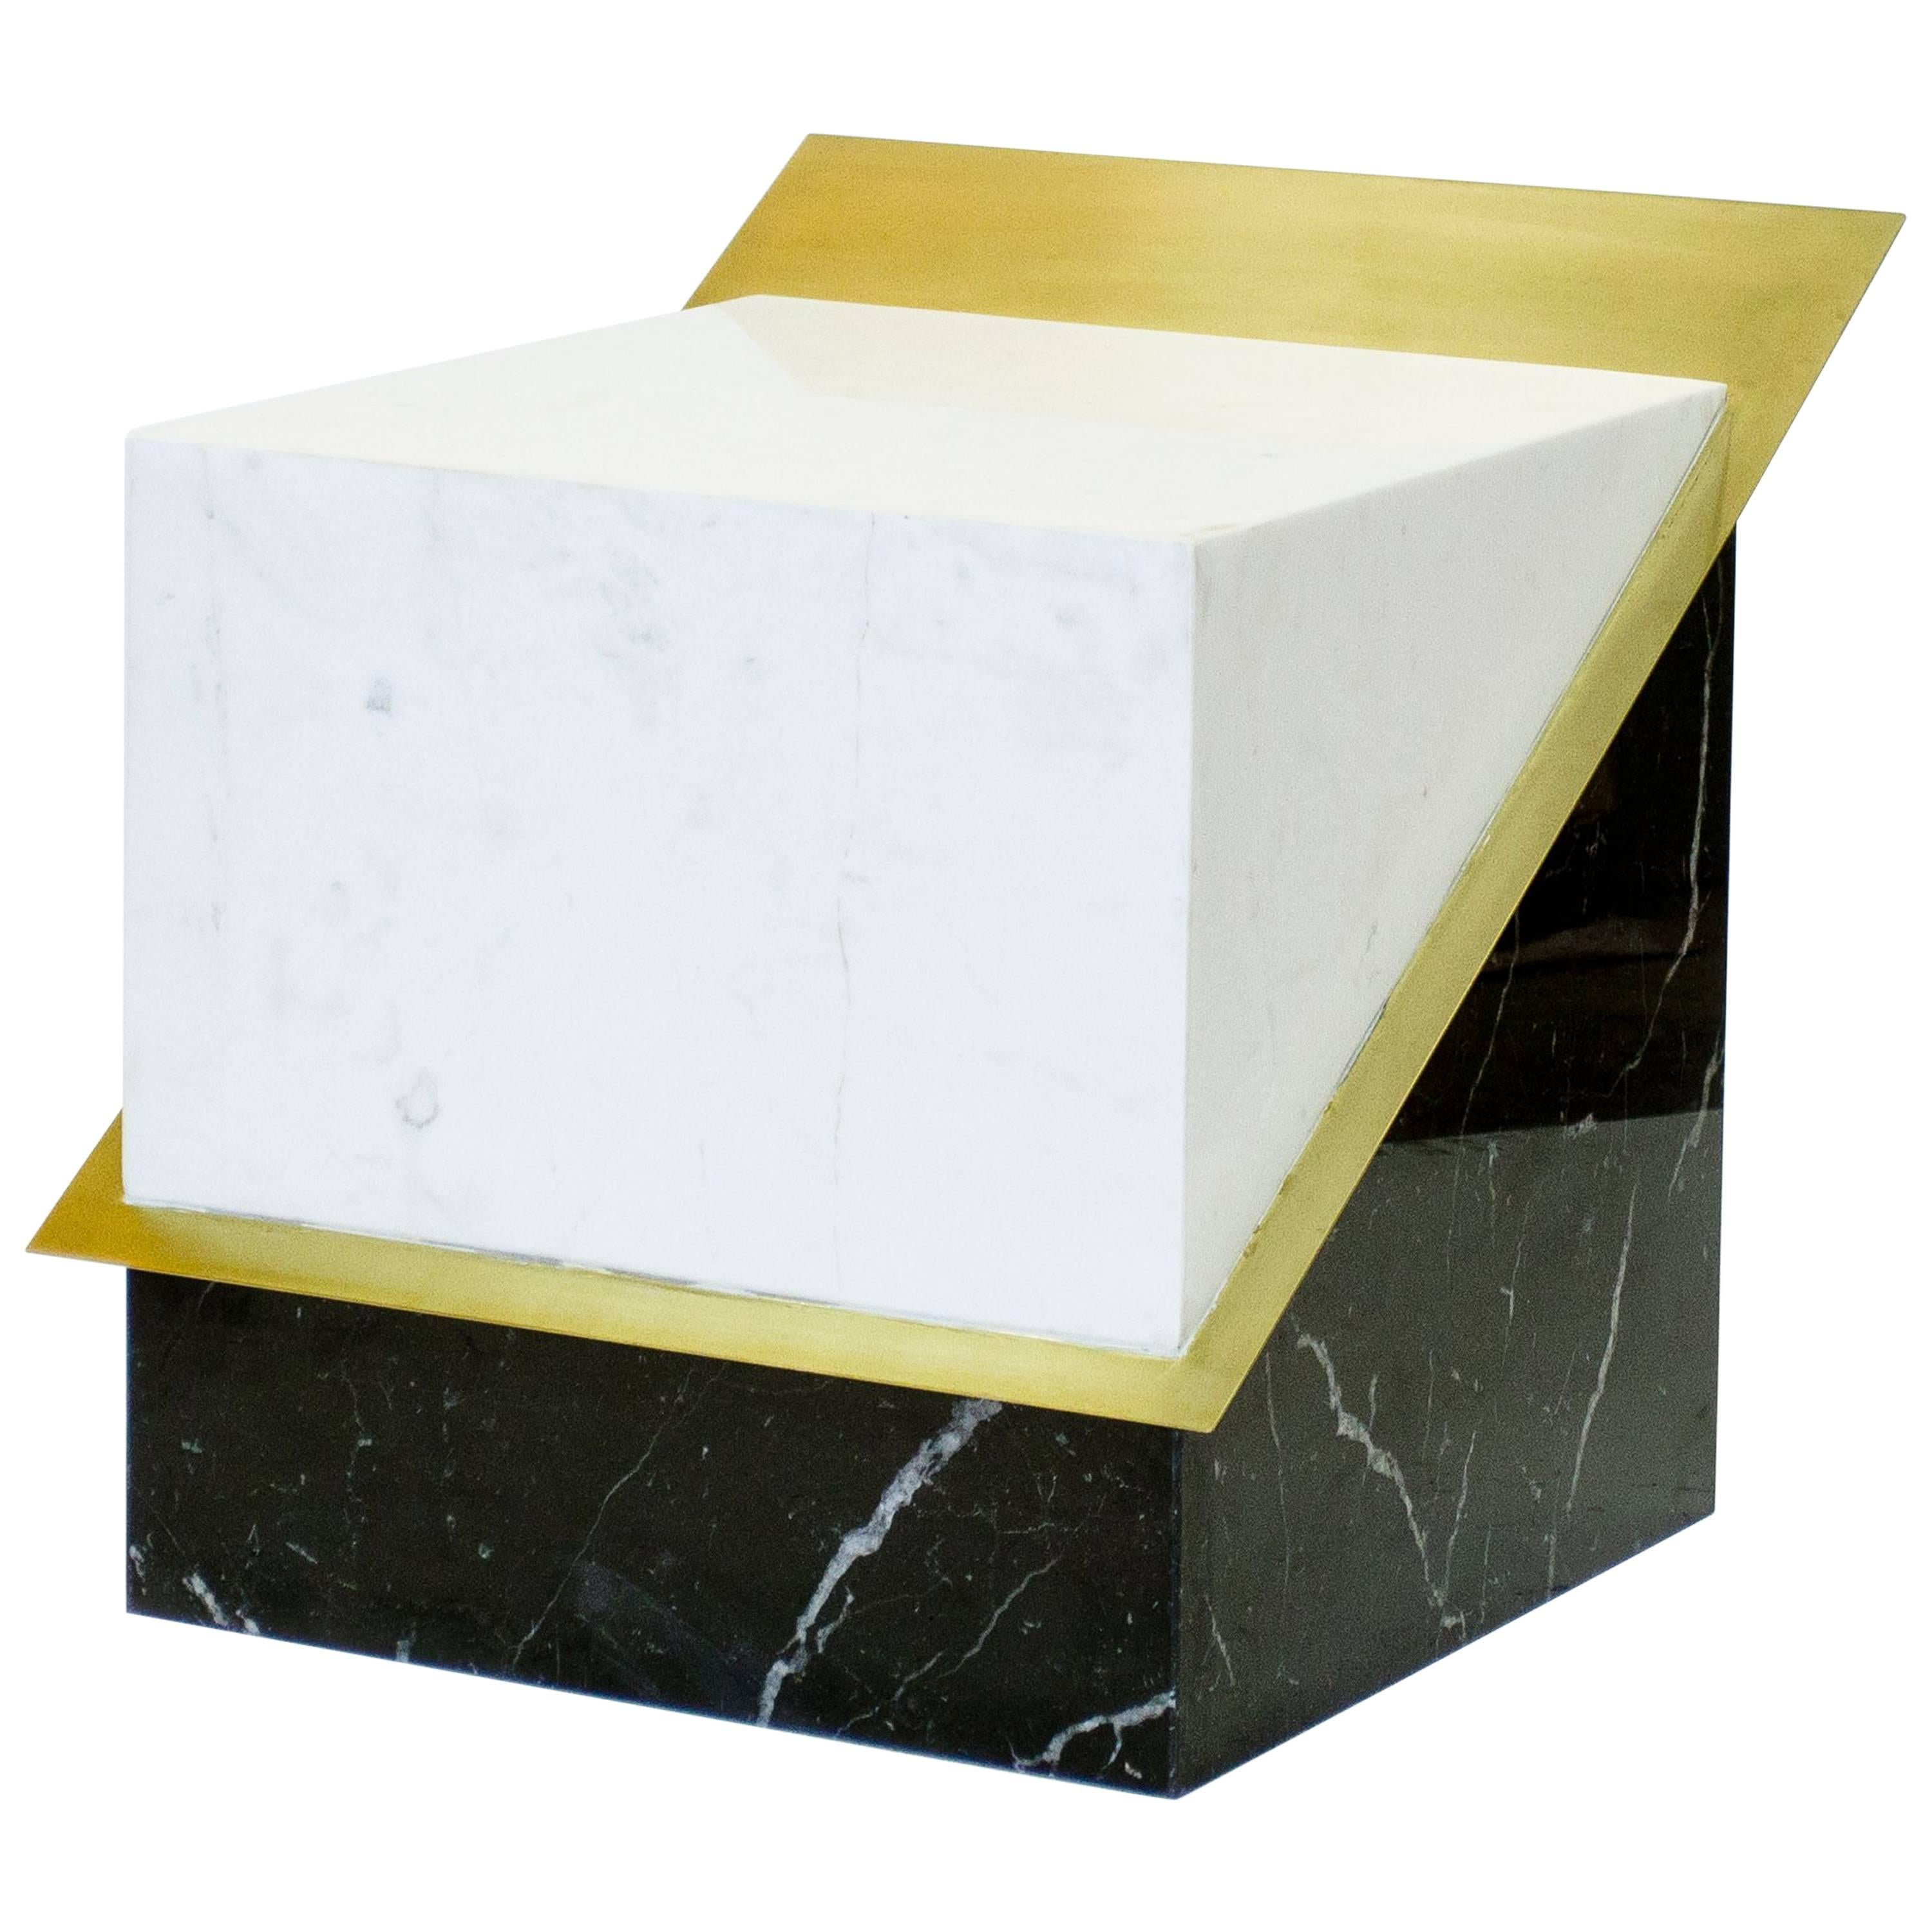 Stool in Black and White Marble and Brass, Limited Edition by O Formigueiro im Angebot